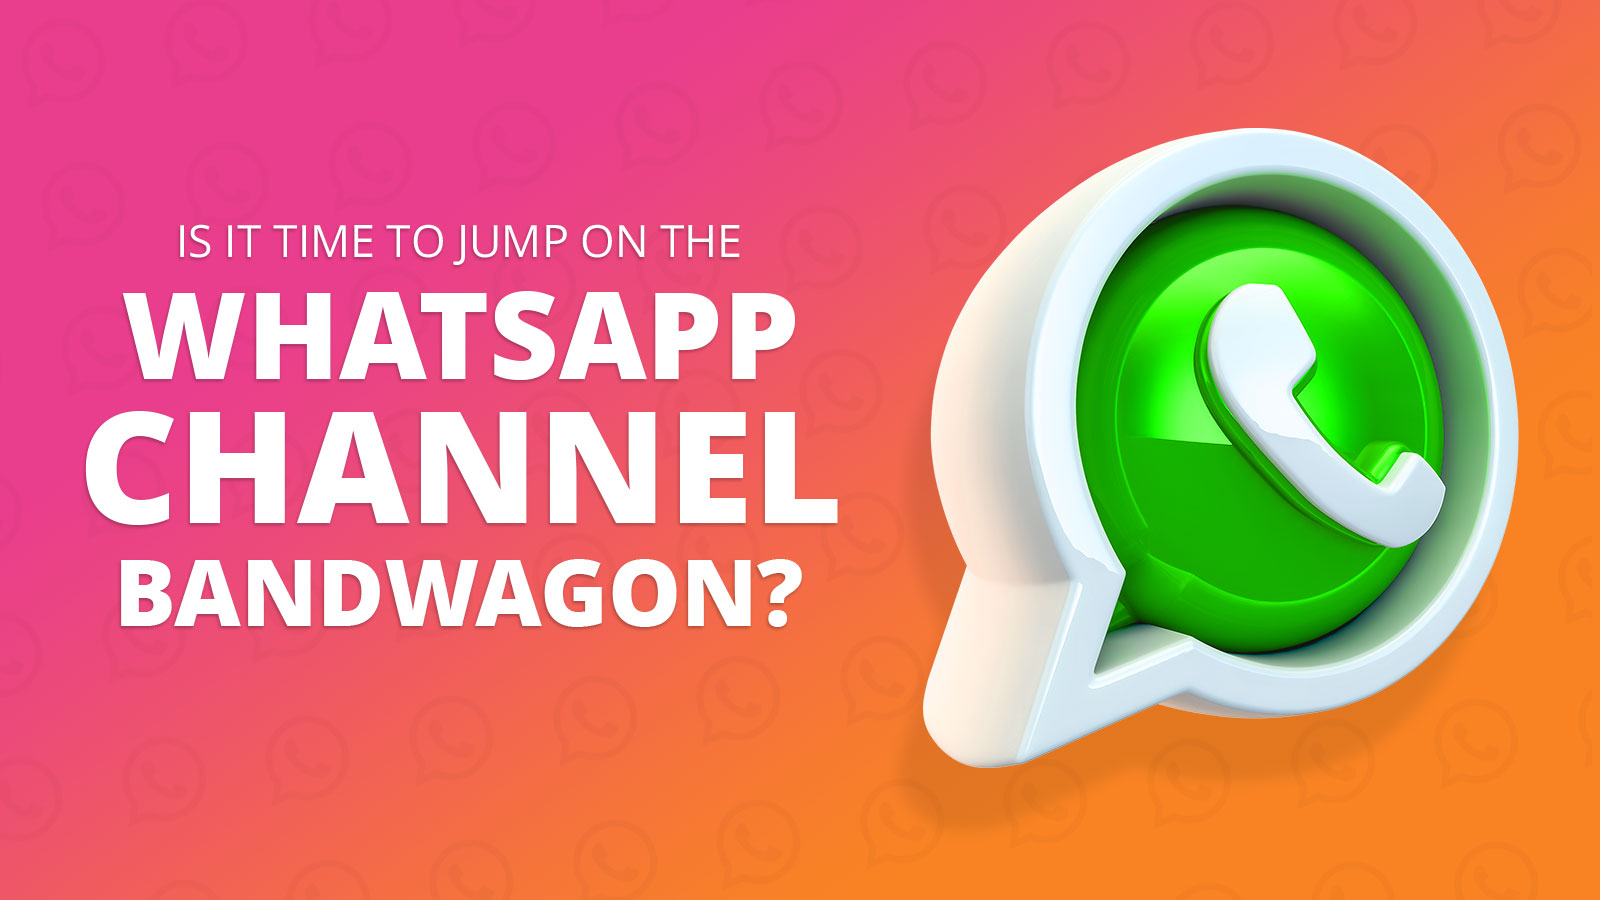 Is it time to jump on the WhatsApp Channel bandwagon?